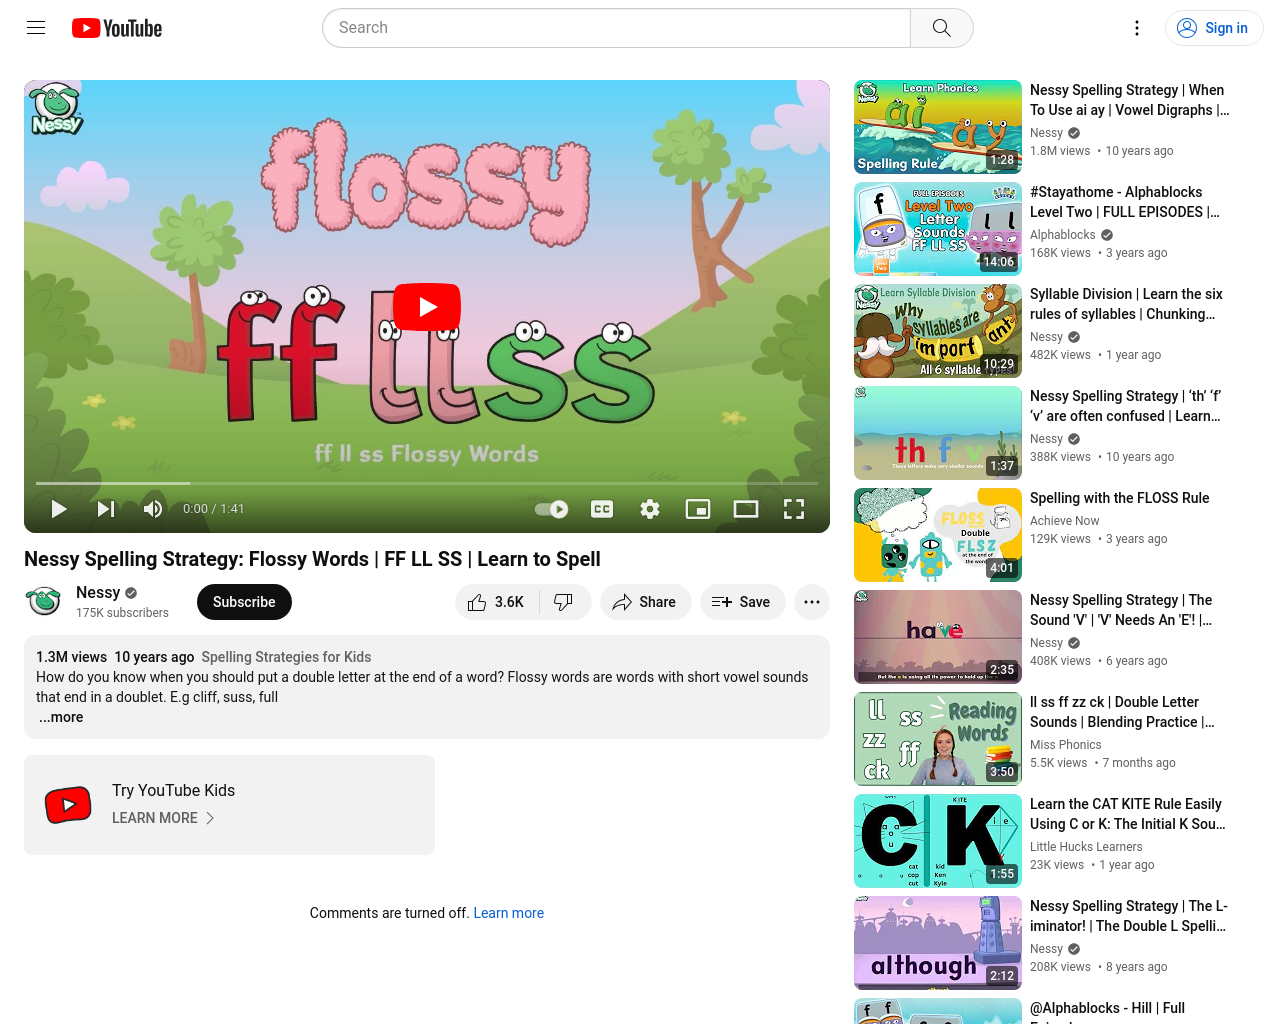 Nessy spelling strategy - Flossy Words